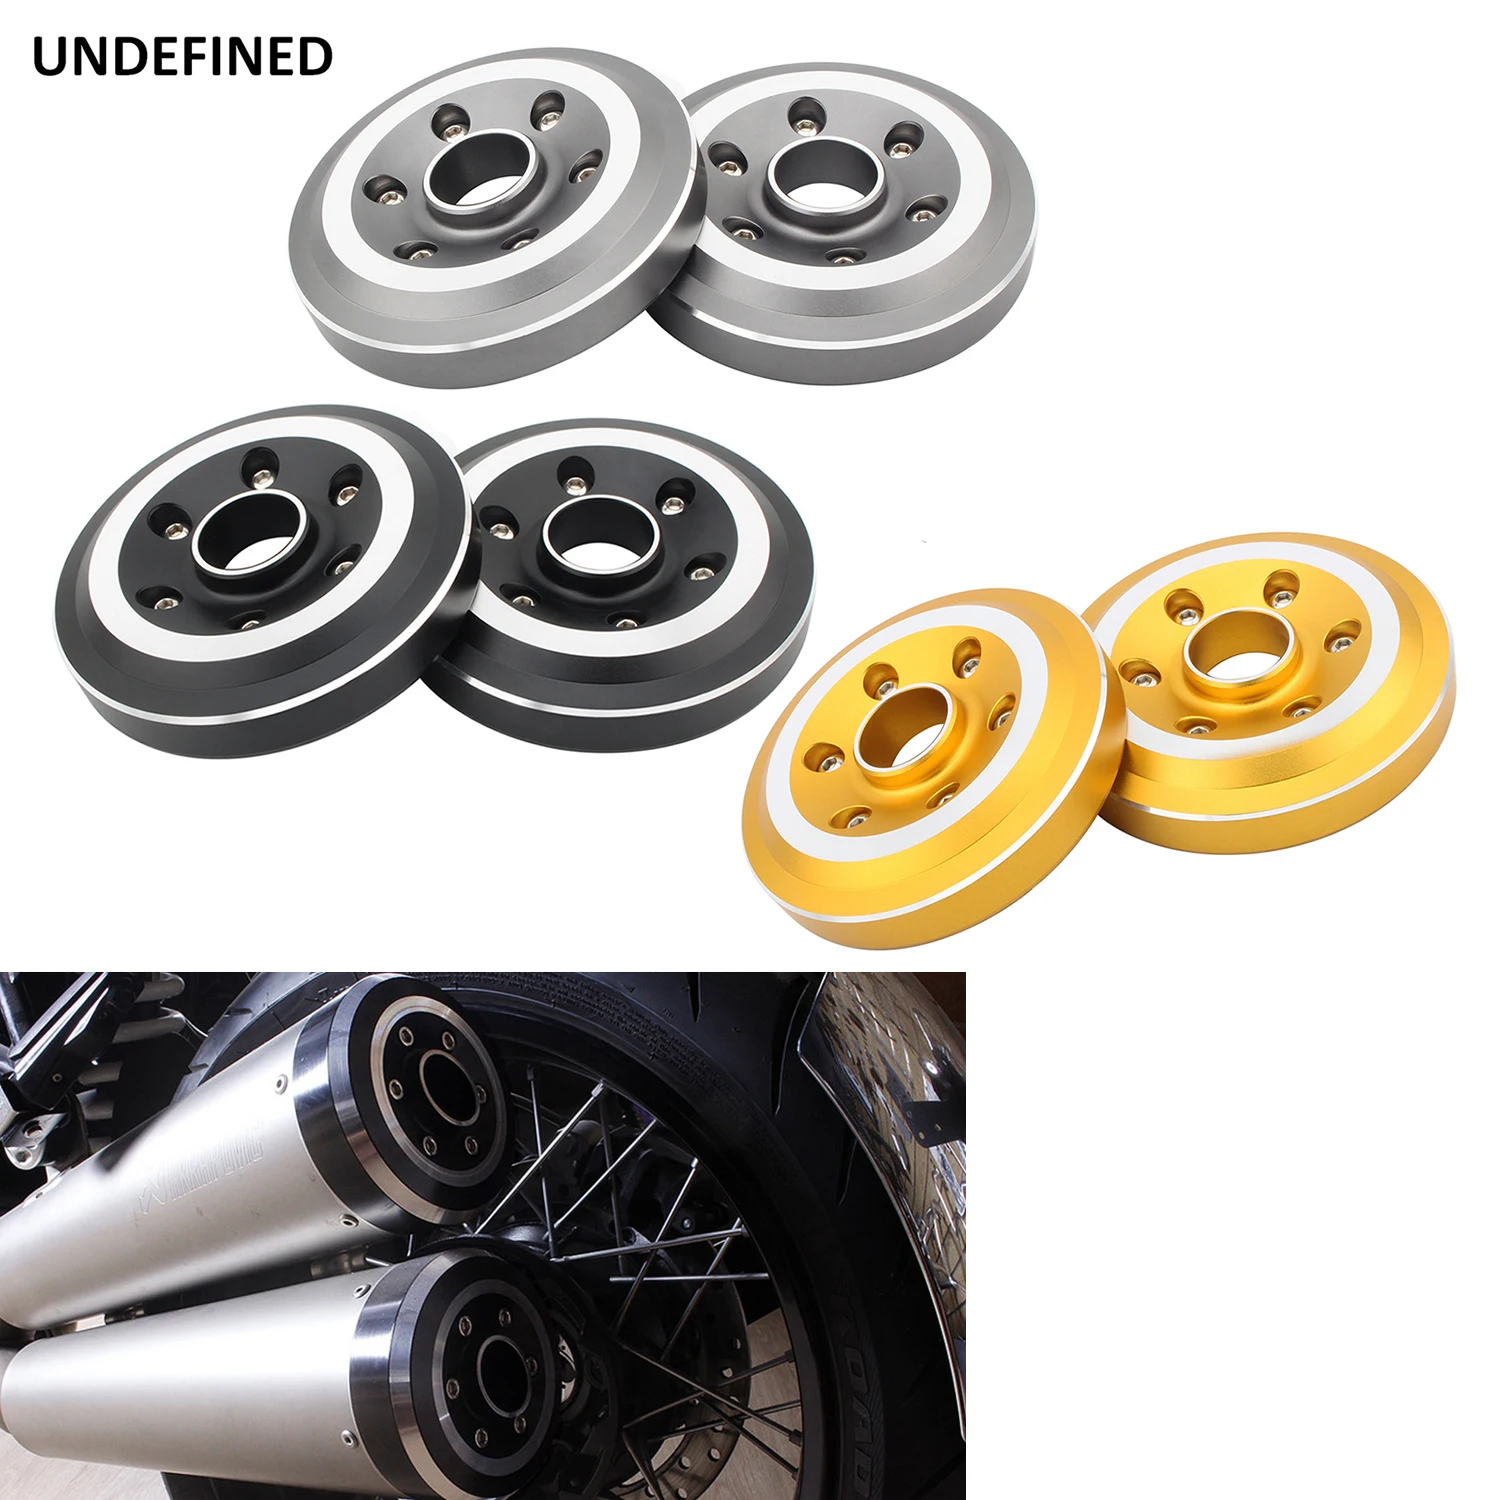 

Motorcycle Exhaust Tip Tail Cover Muffler End Cap Protector For BMW R NineT Nine T R9T Racer Pure Urban 2014-2019 R1200R R 1200R